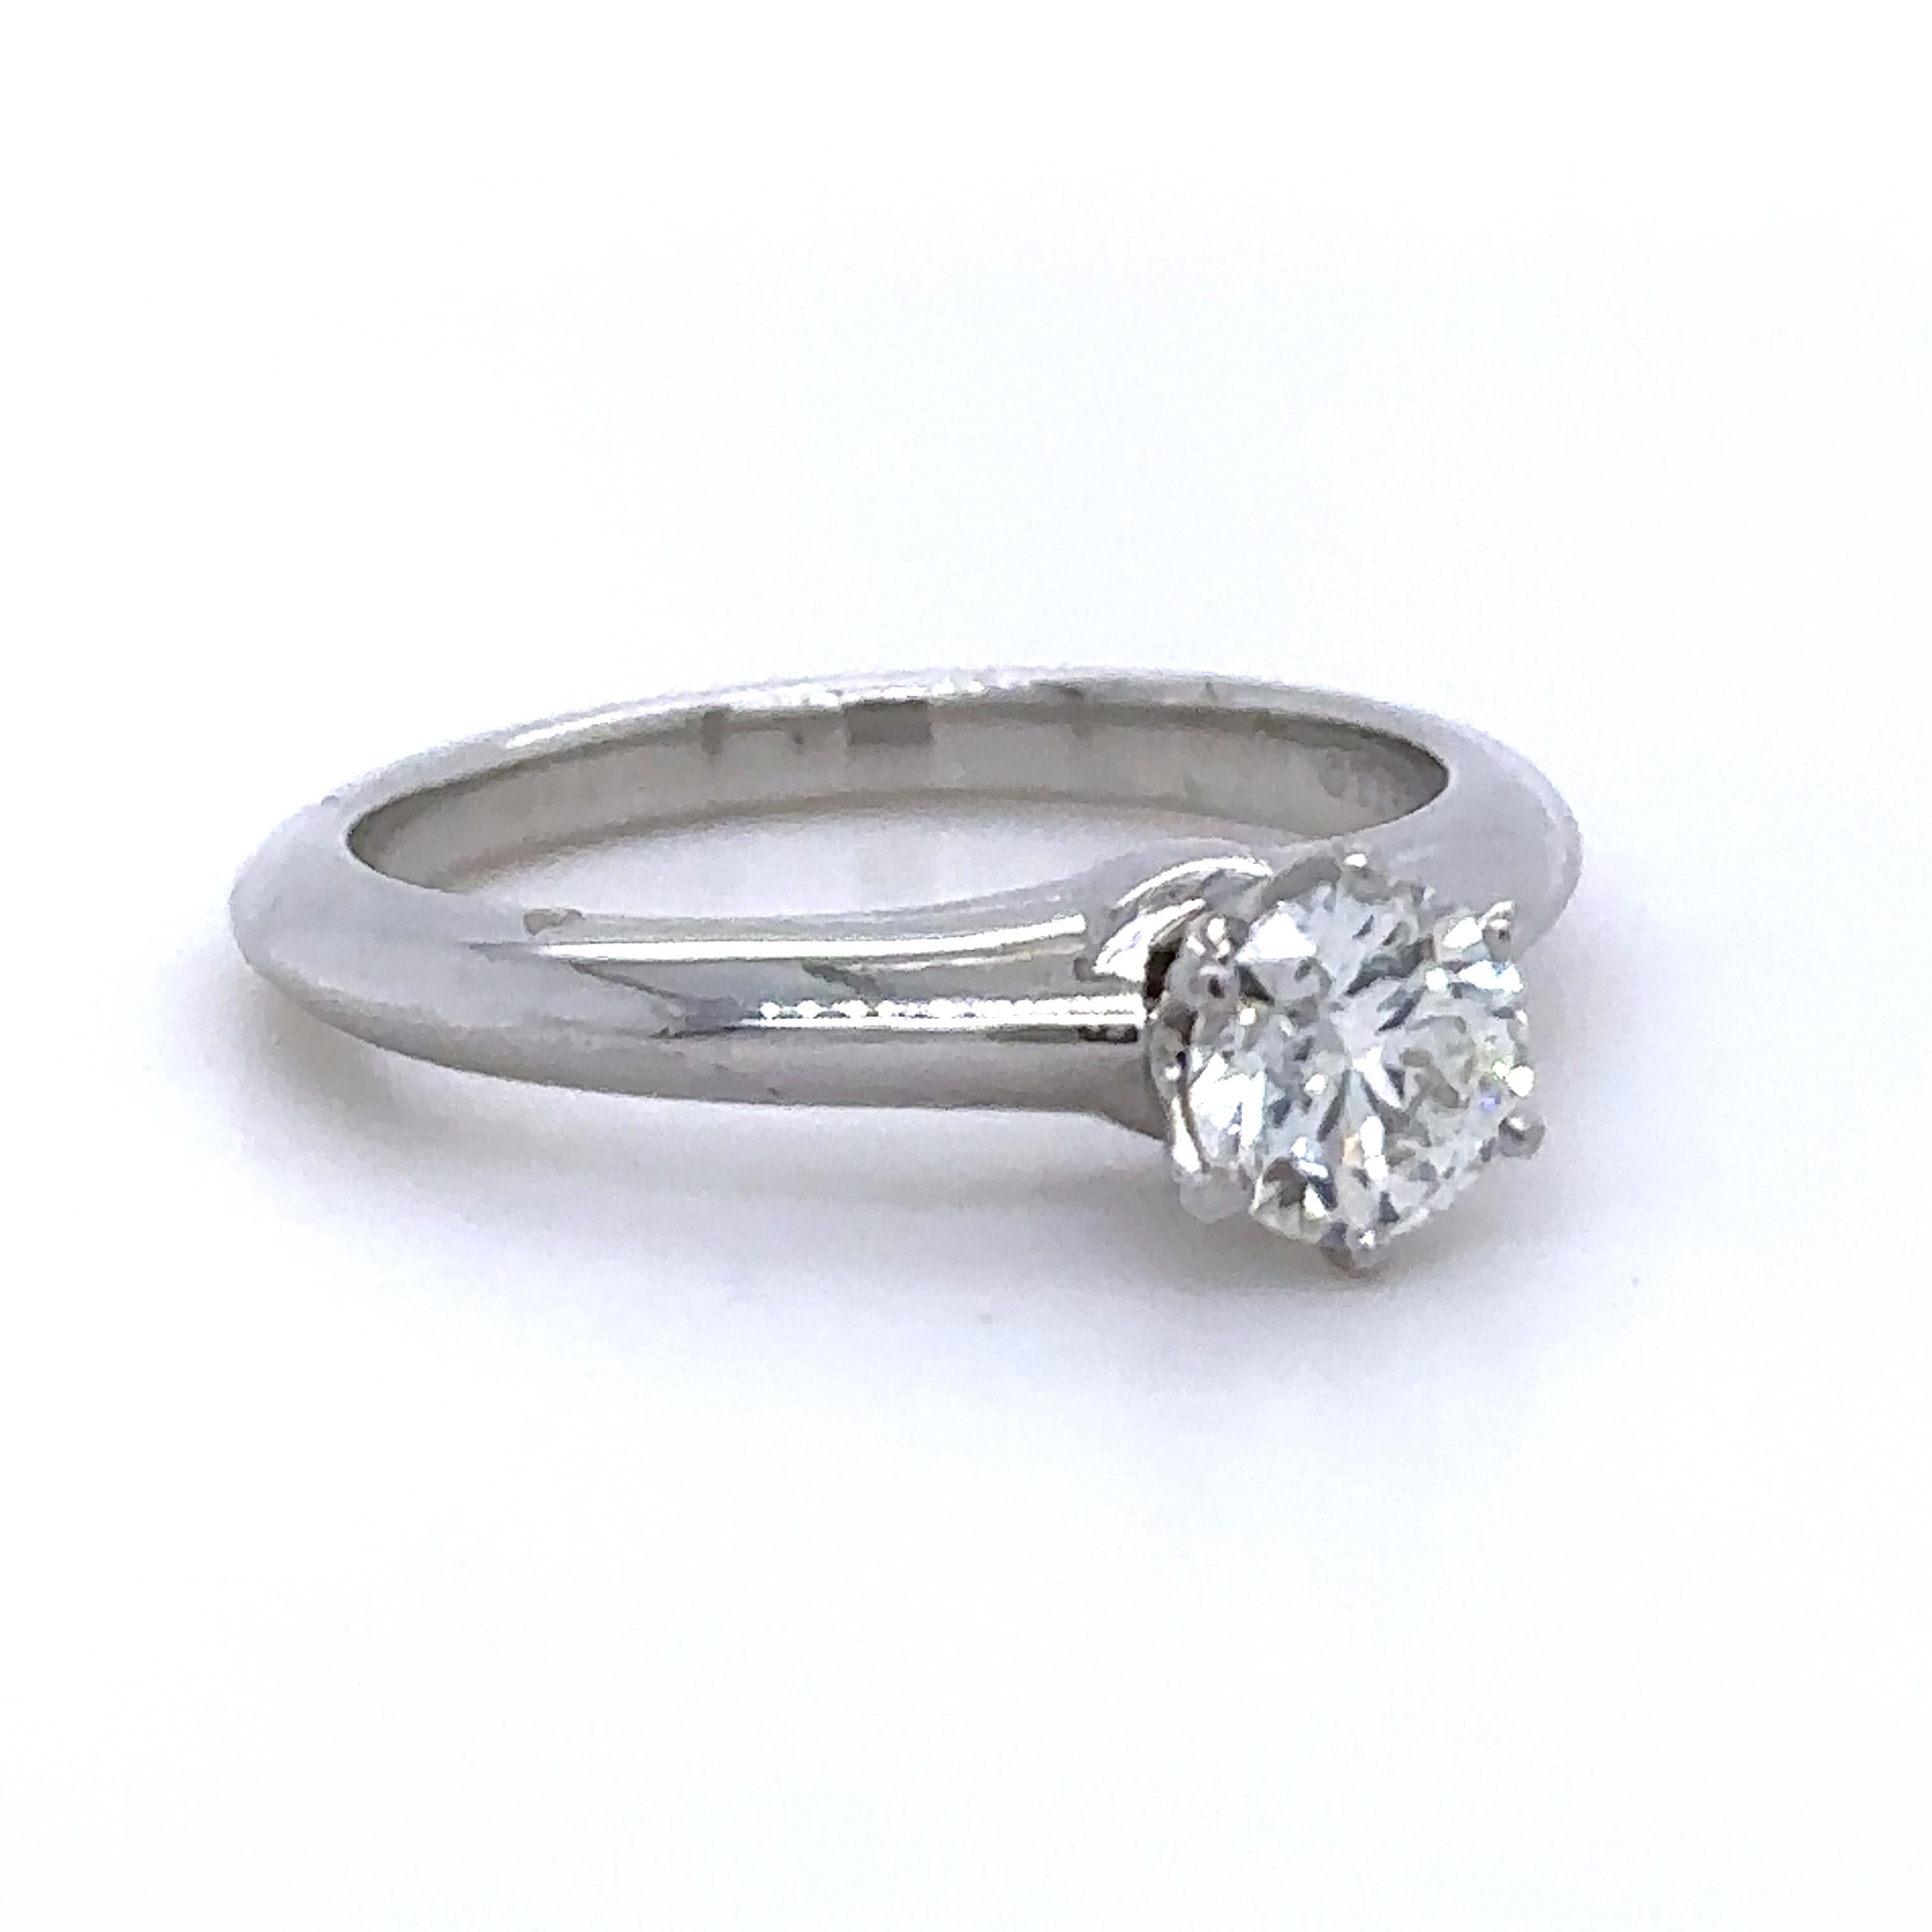 Unique features: 

Tiffany & Co Engagement Ring 0.59ct - Solitaire

A true design masterpiece, the Tiffany® Setting is the world’s most iconic engagement ring. Flawlessly engineered, the six-prong setting virtually disappears and allows the